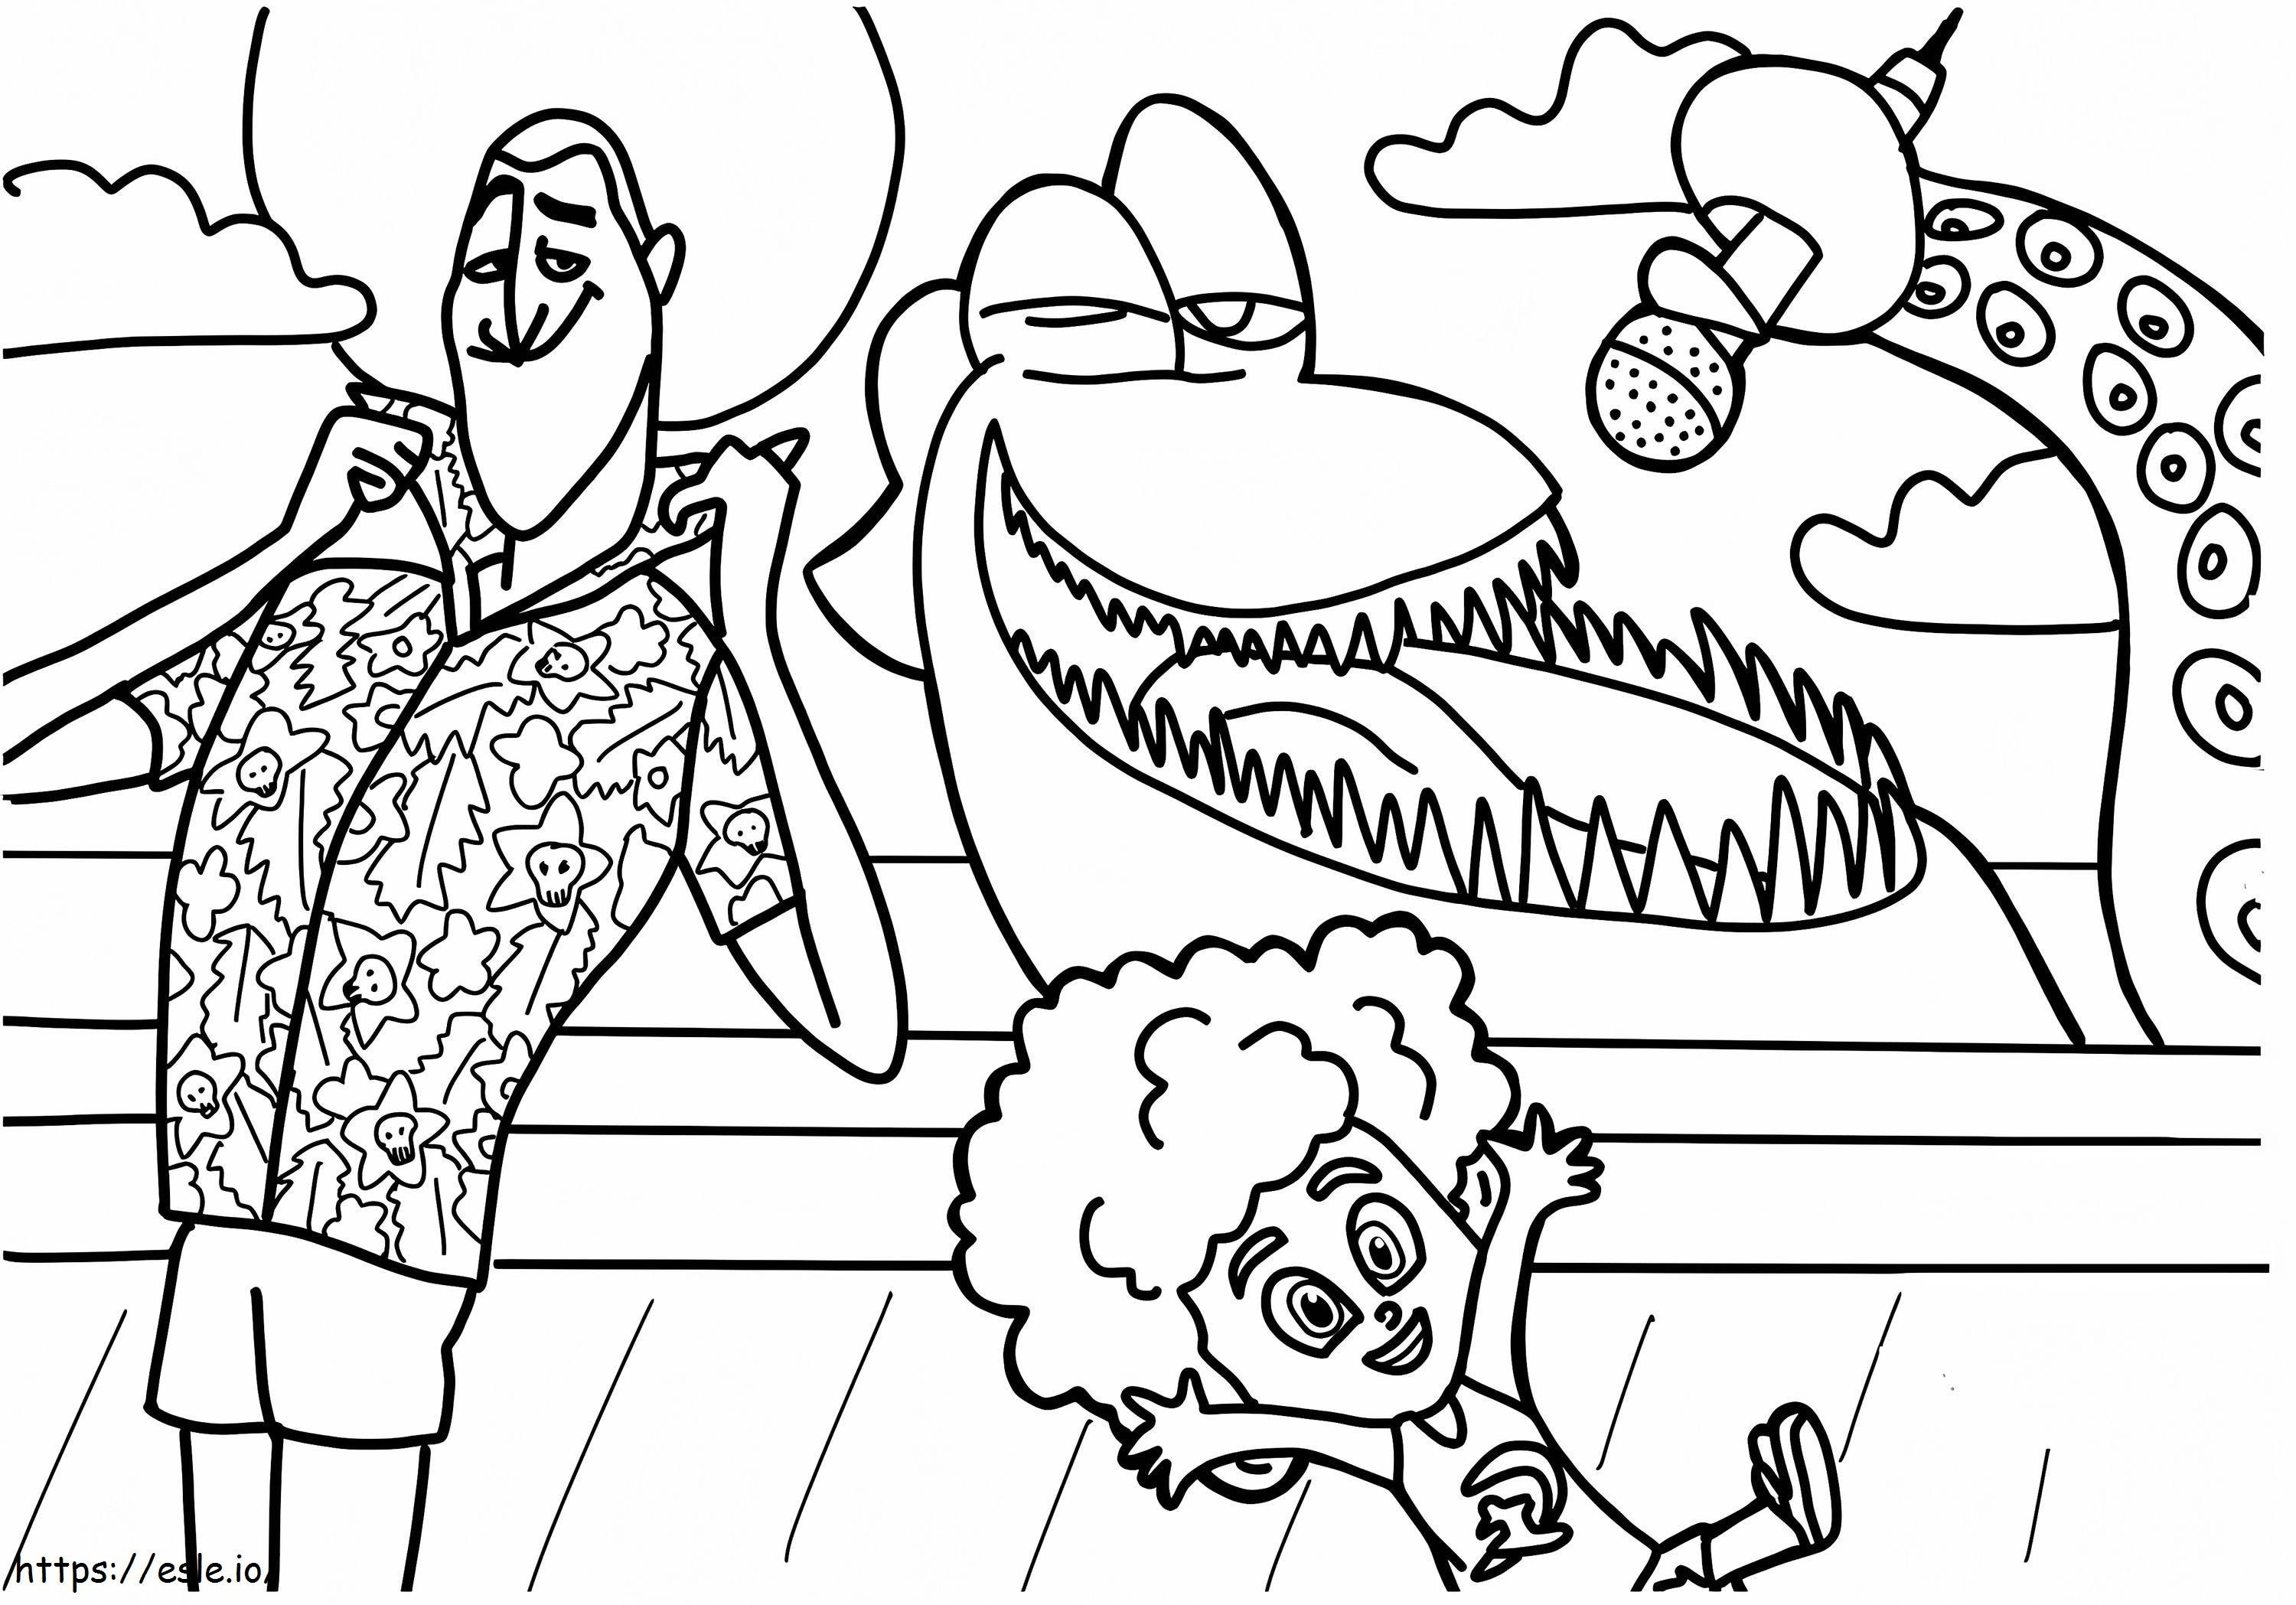 Maxresdefault 6 coloring page